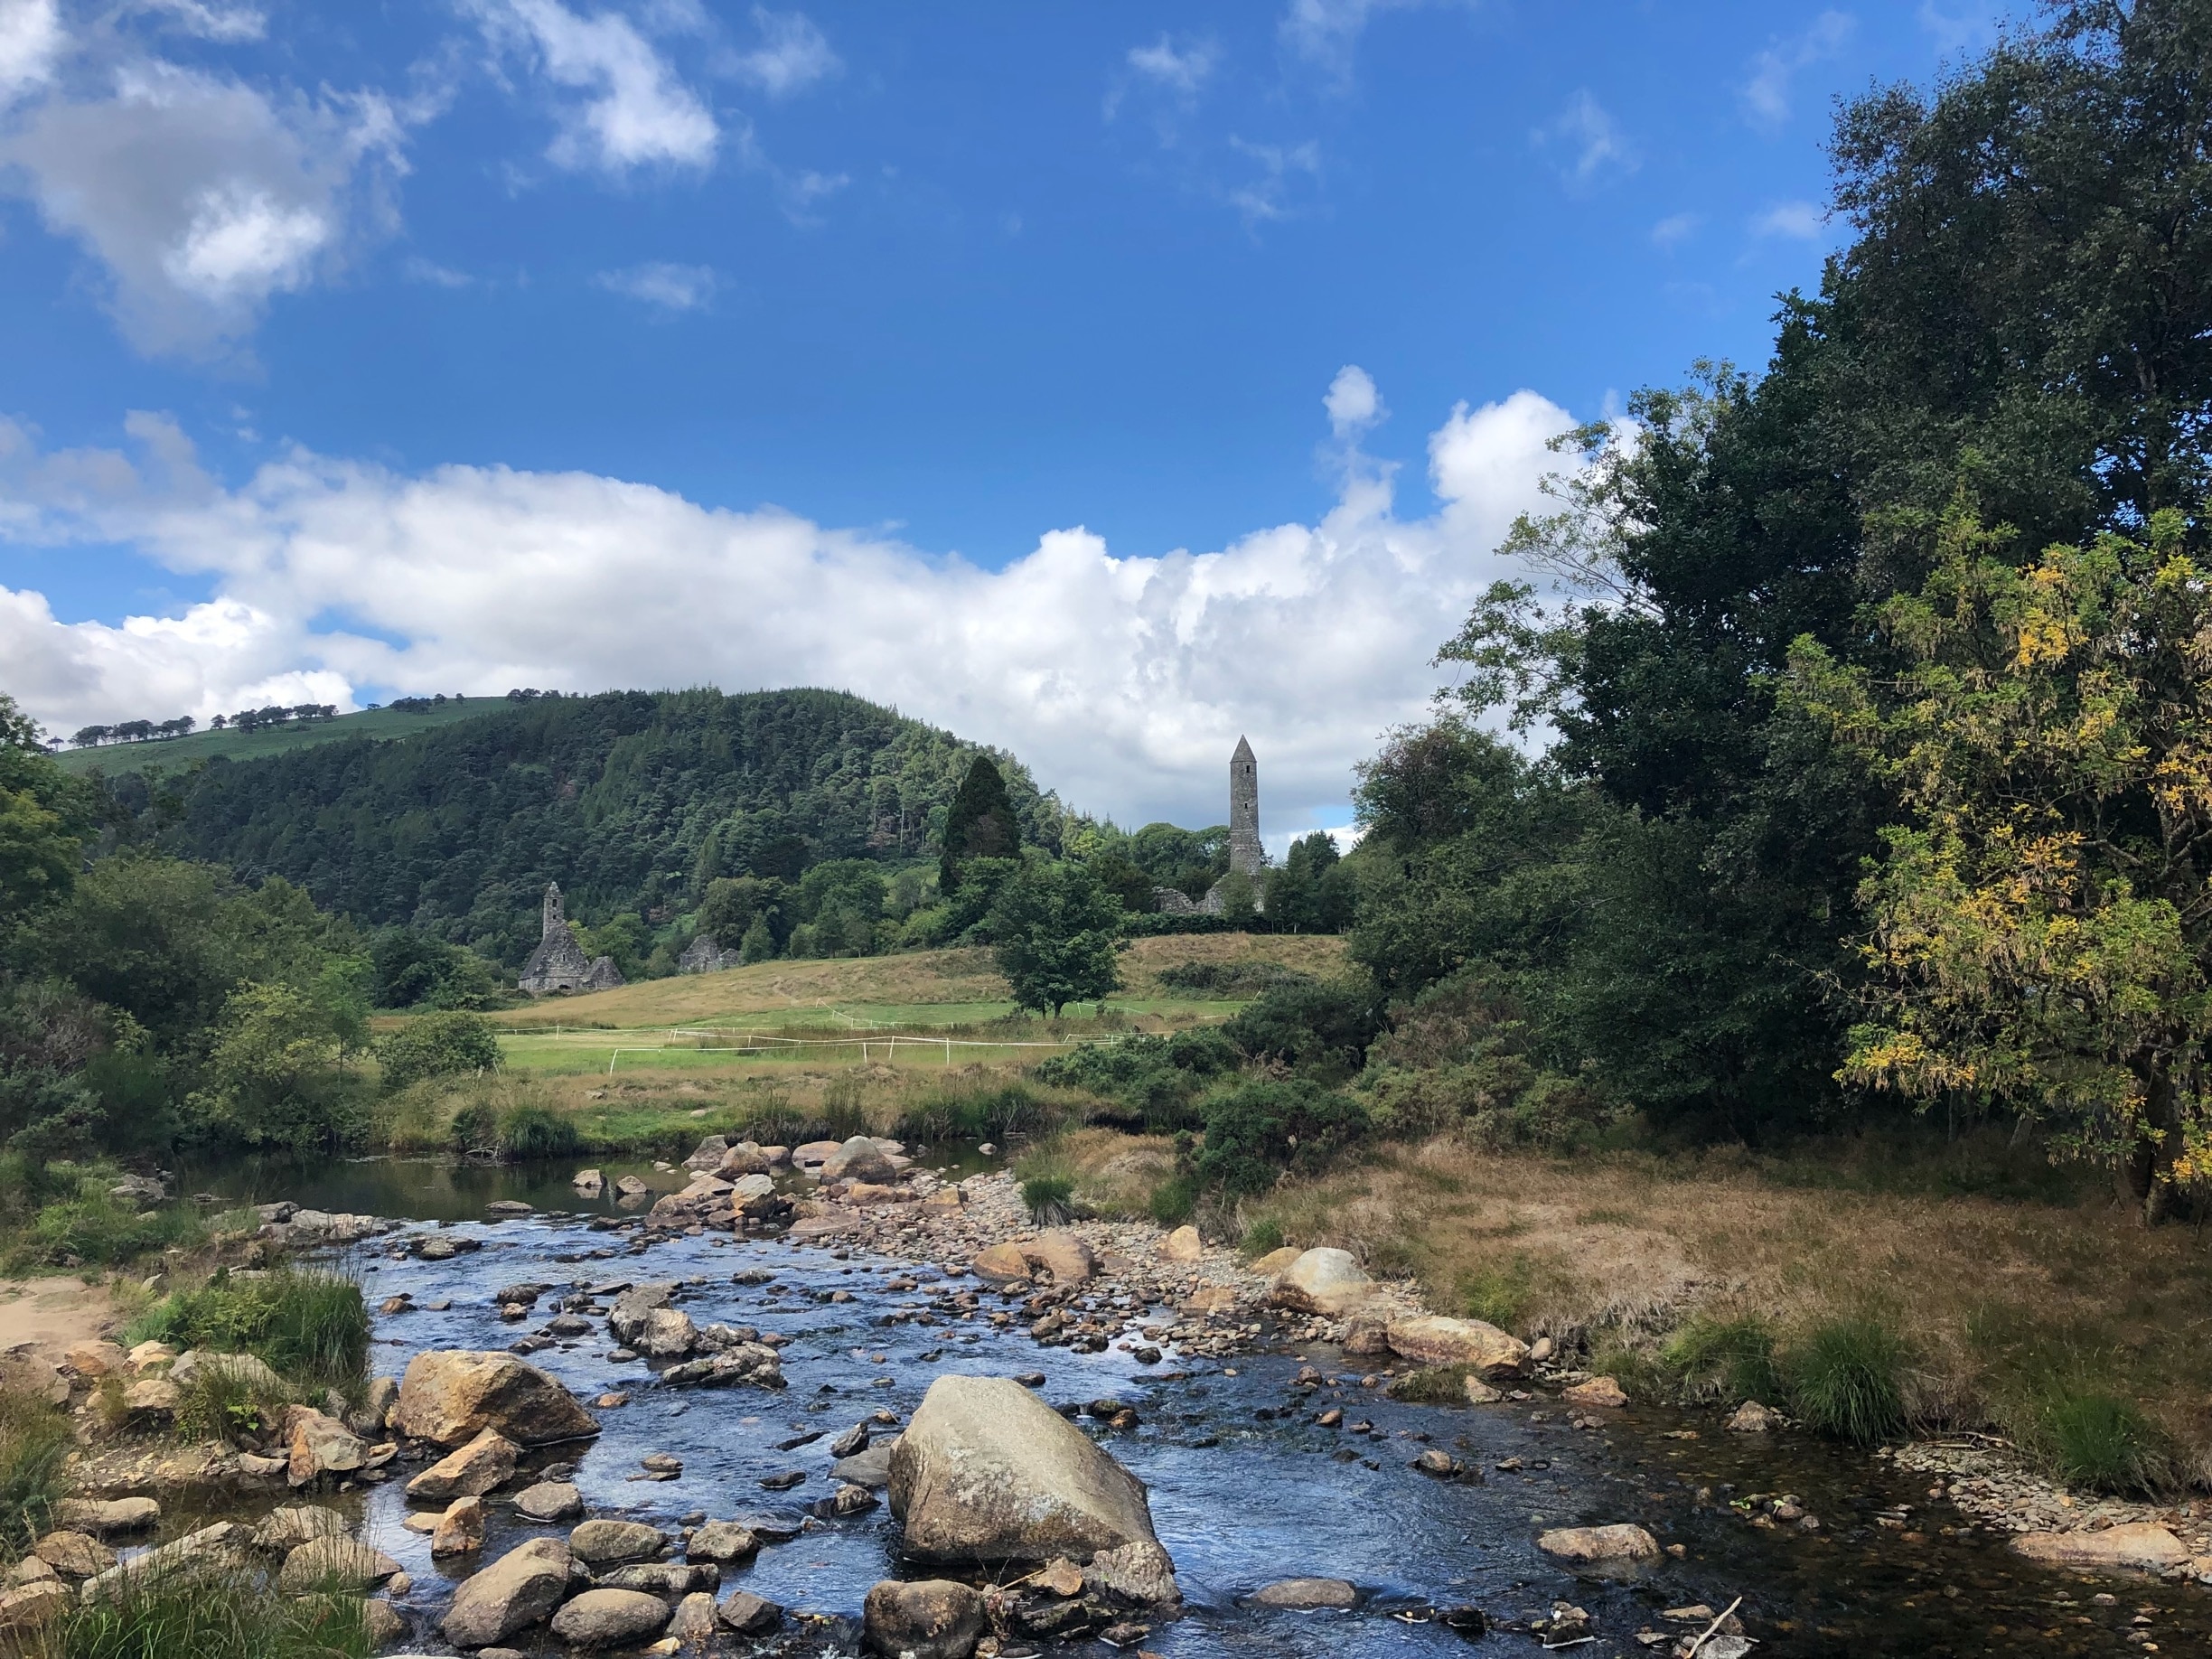 Glendalough is a very scenic area with multiple hiking trails, an old church accompanied by a graveyard, a majestic lake, and a visitor center. I am not much of a hiker, but you don’t have to go very far to get some amazing views! #Ireland #Glendalough #Outdoors #Hiking 